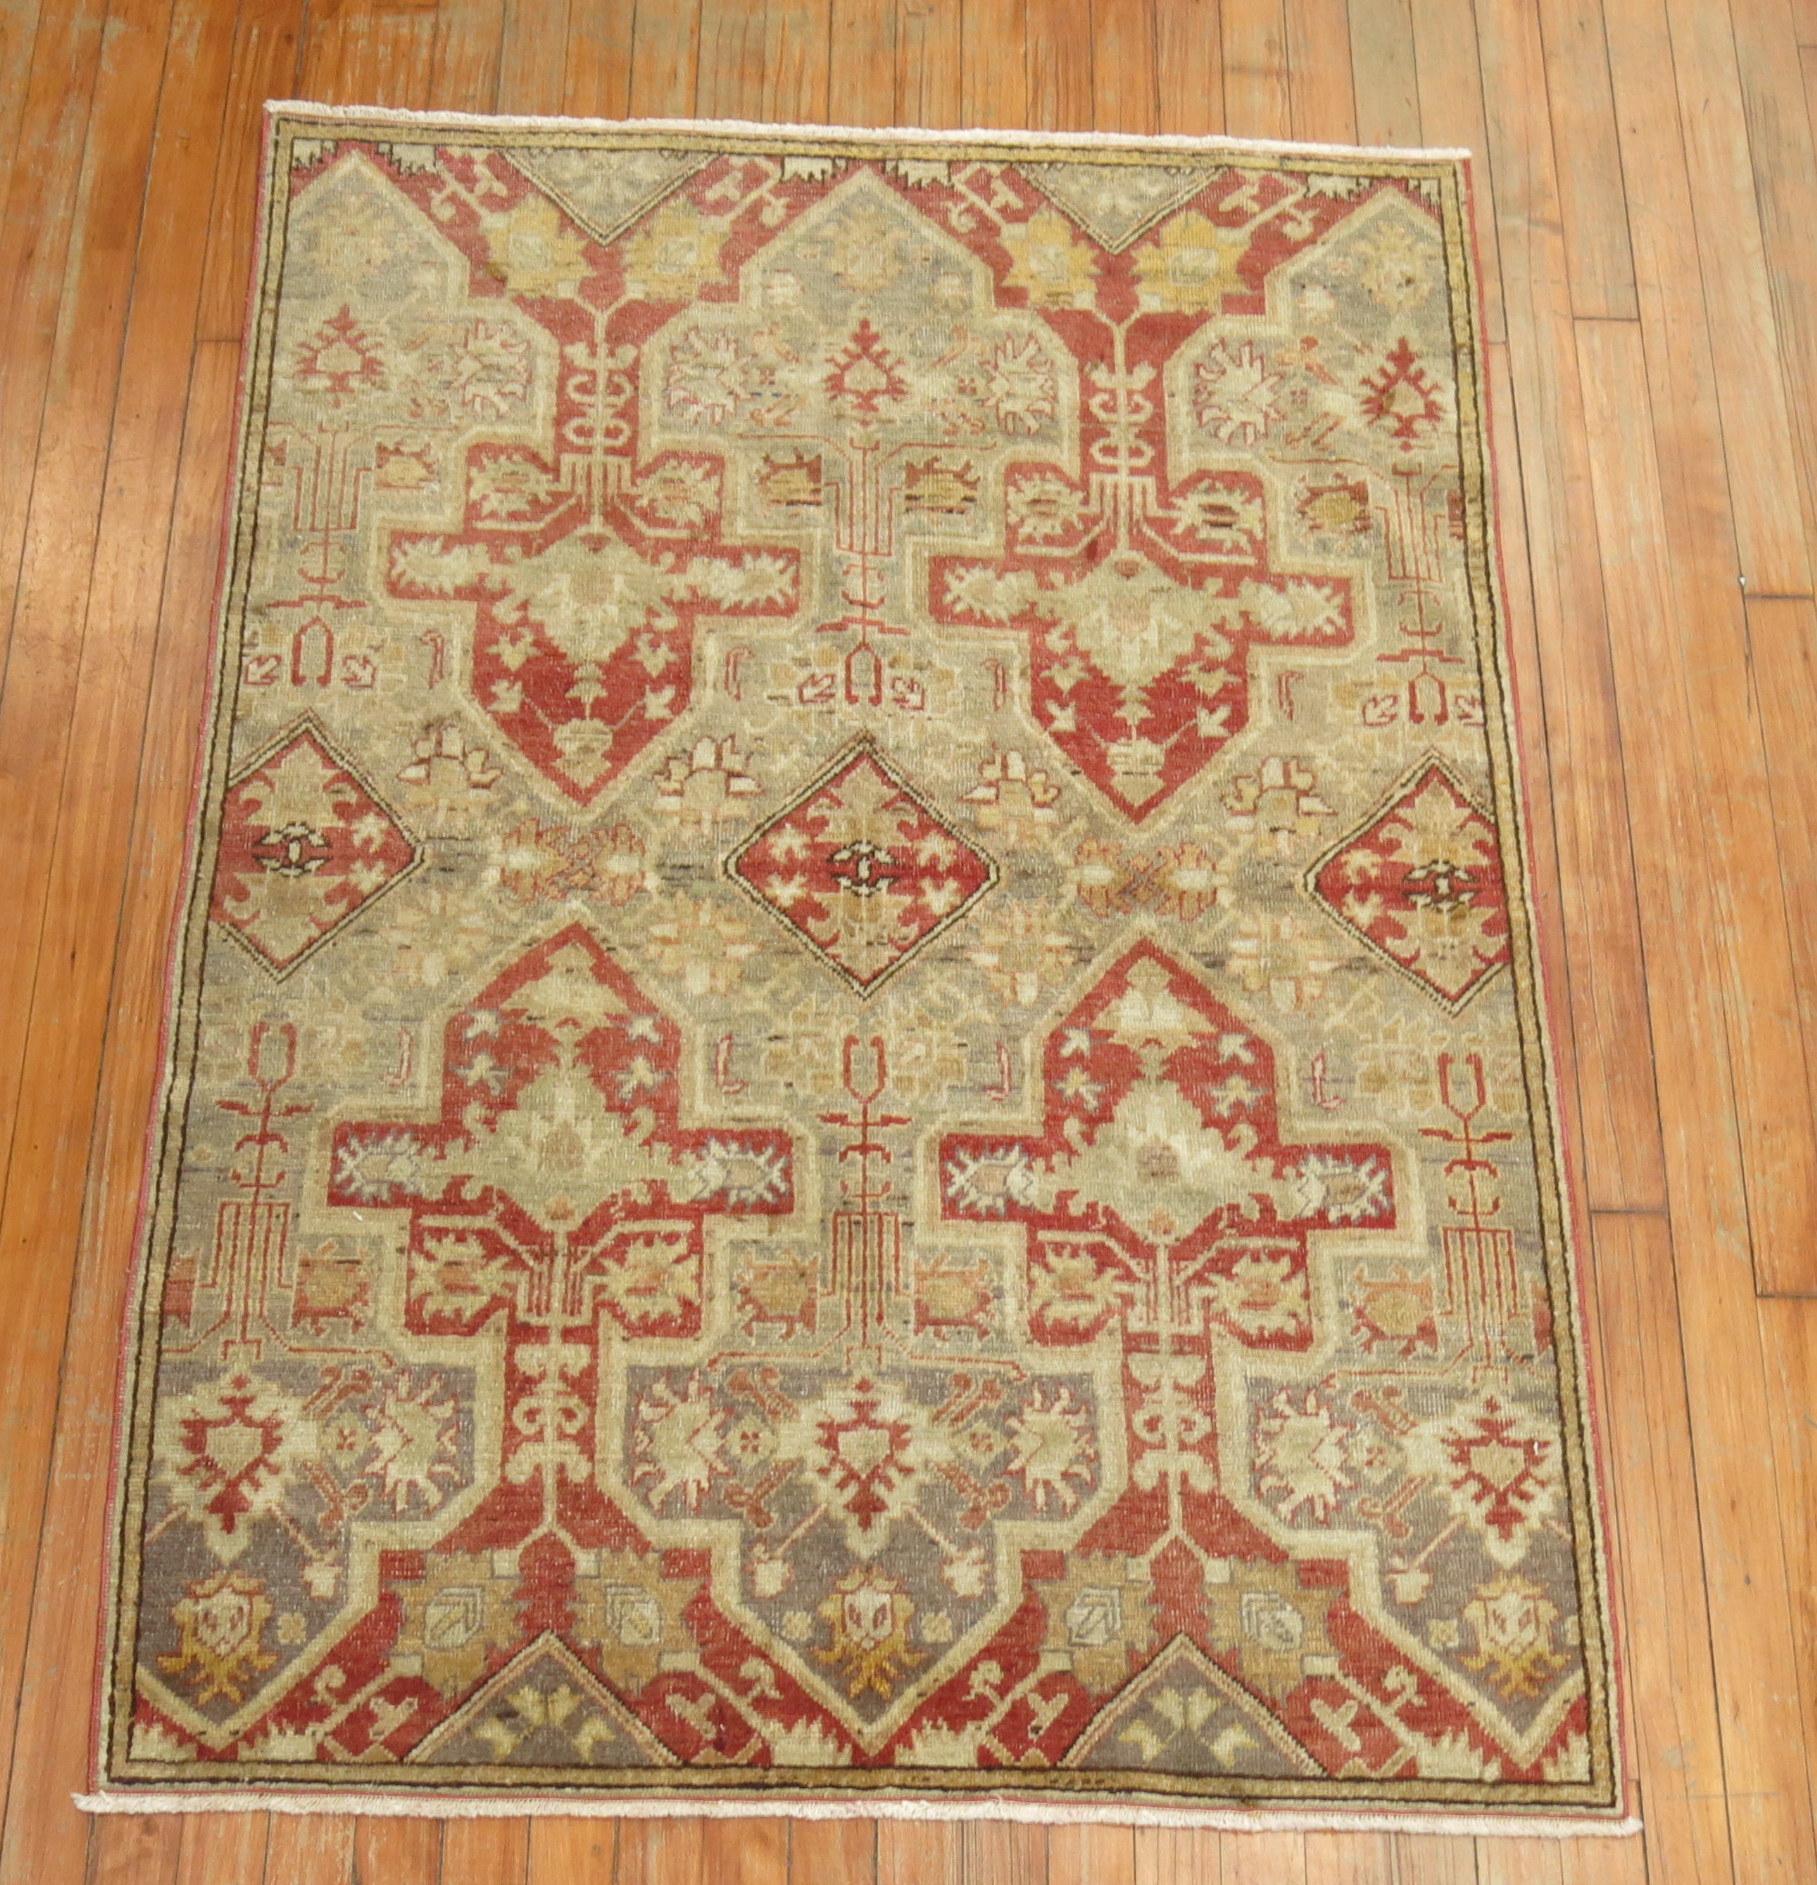 An early 20th century Turkish Sivas rug featuring a silver/gray color background.